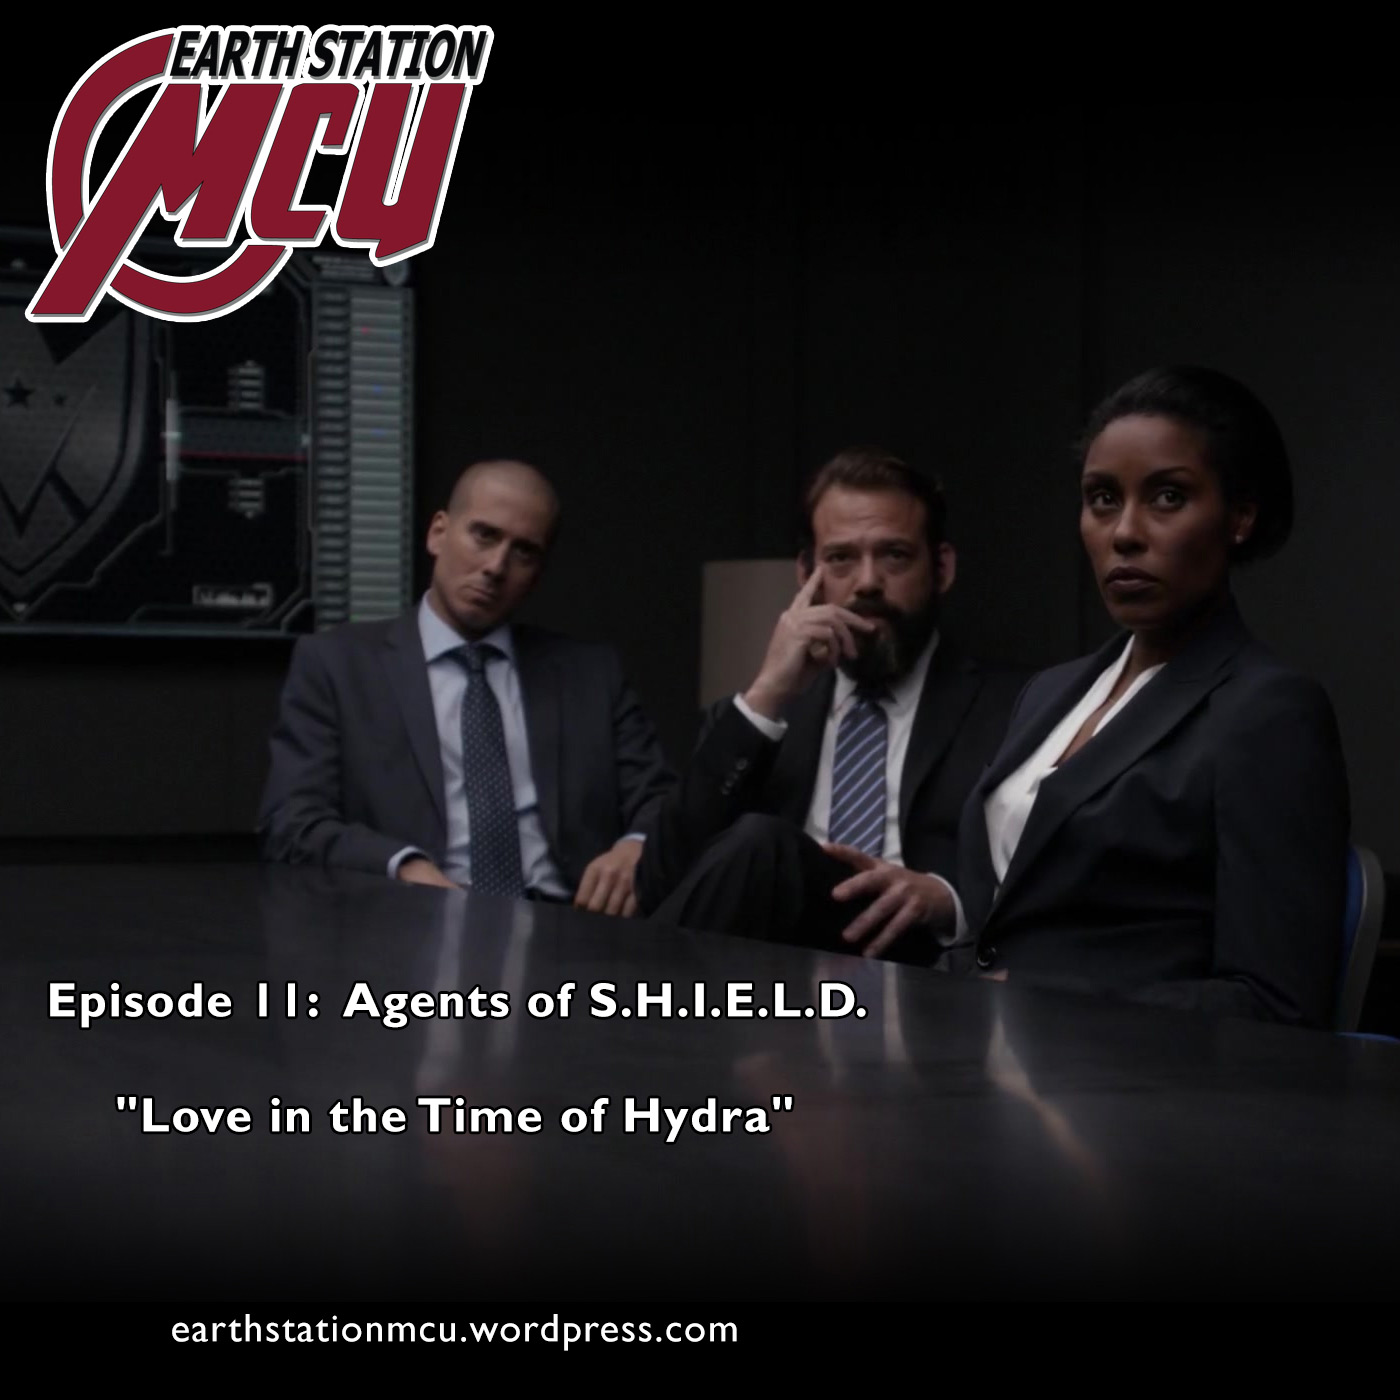 Earth Station MCU Episode Eleven: "Love in the Time of Hydra"